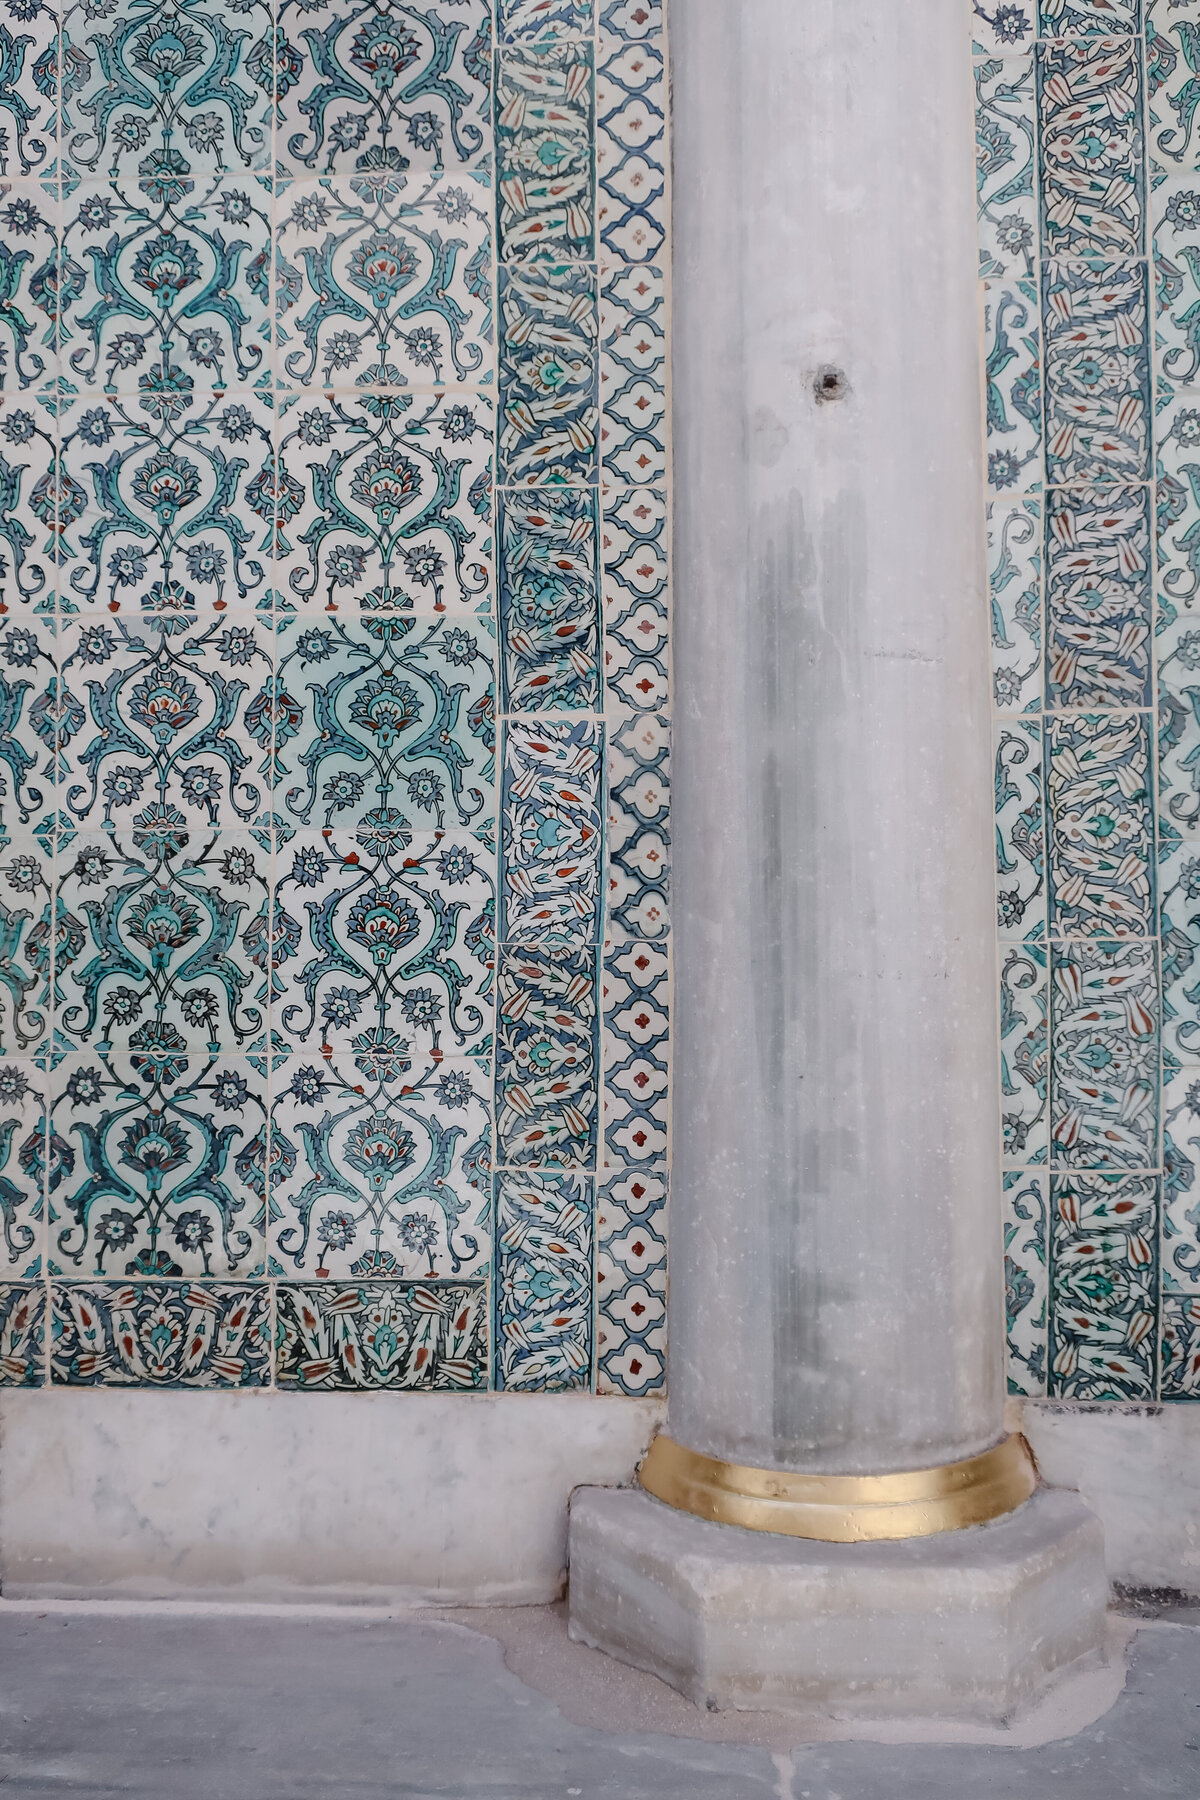 Turkish tiles in blue, gree, red, and white showing interwoven flowers sits behind a column with gilded base